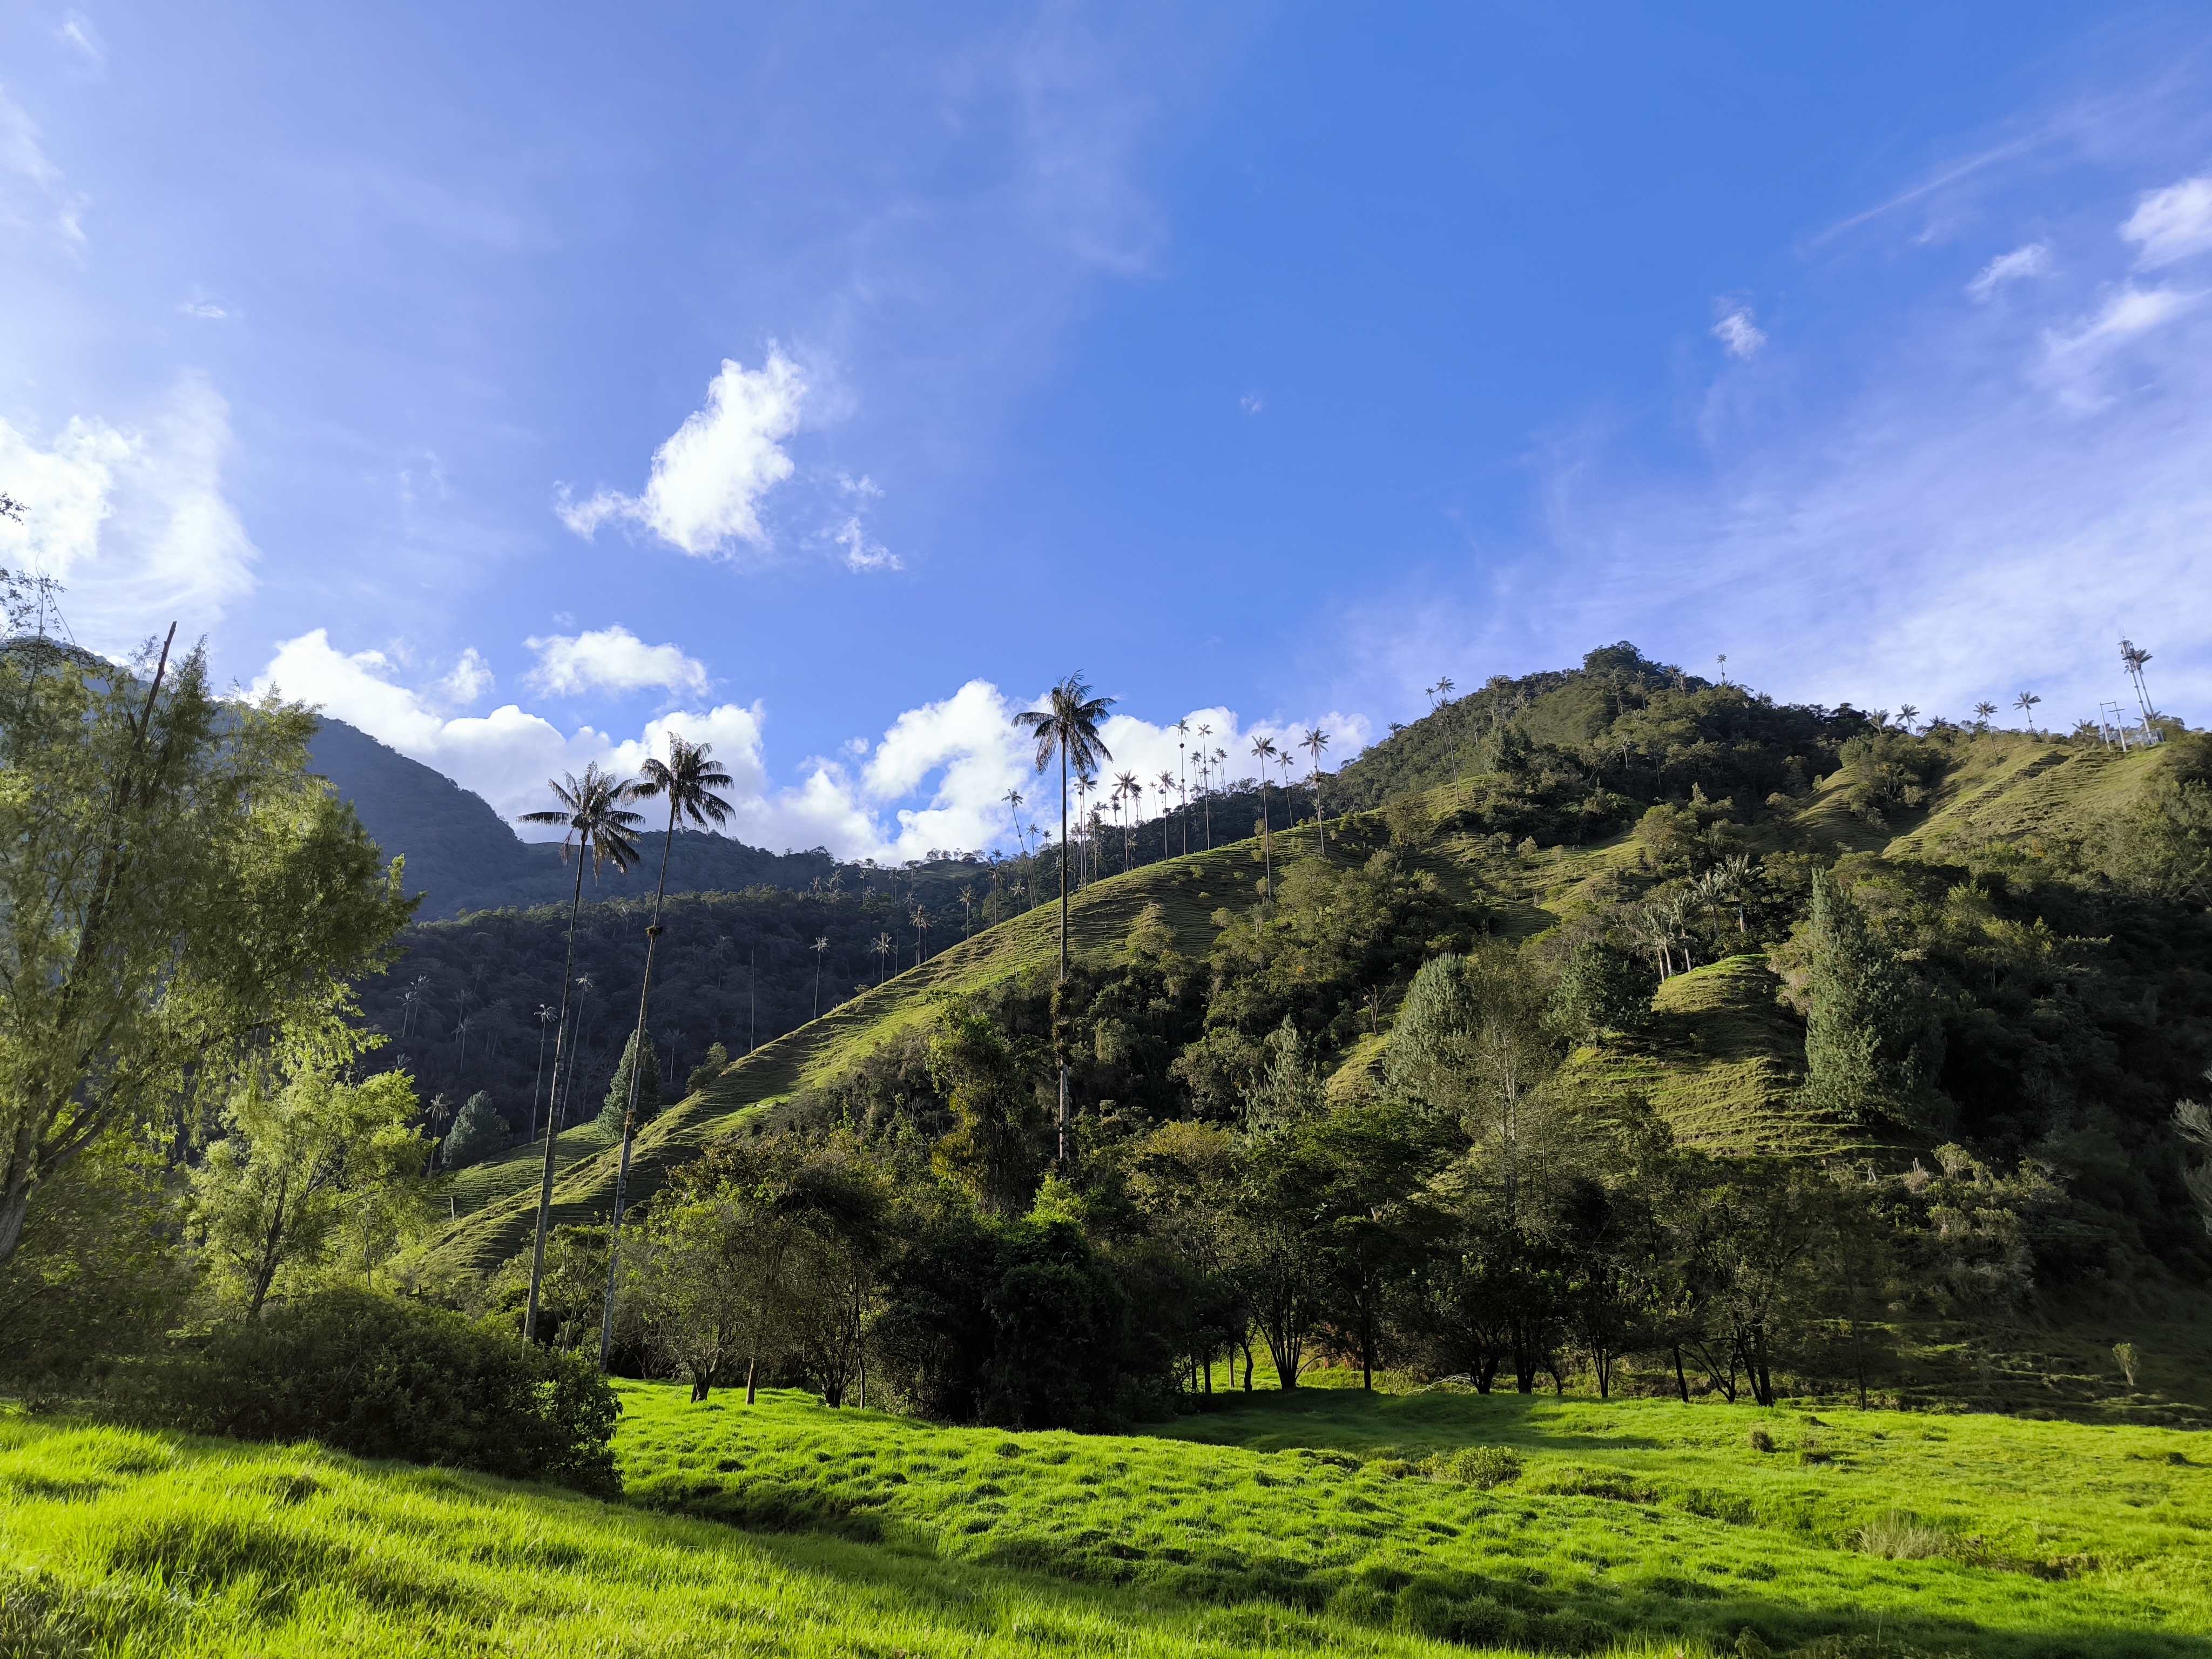 A view of the beautiful Valle de Cocora.